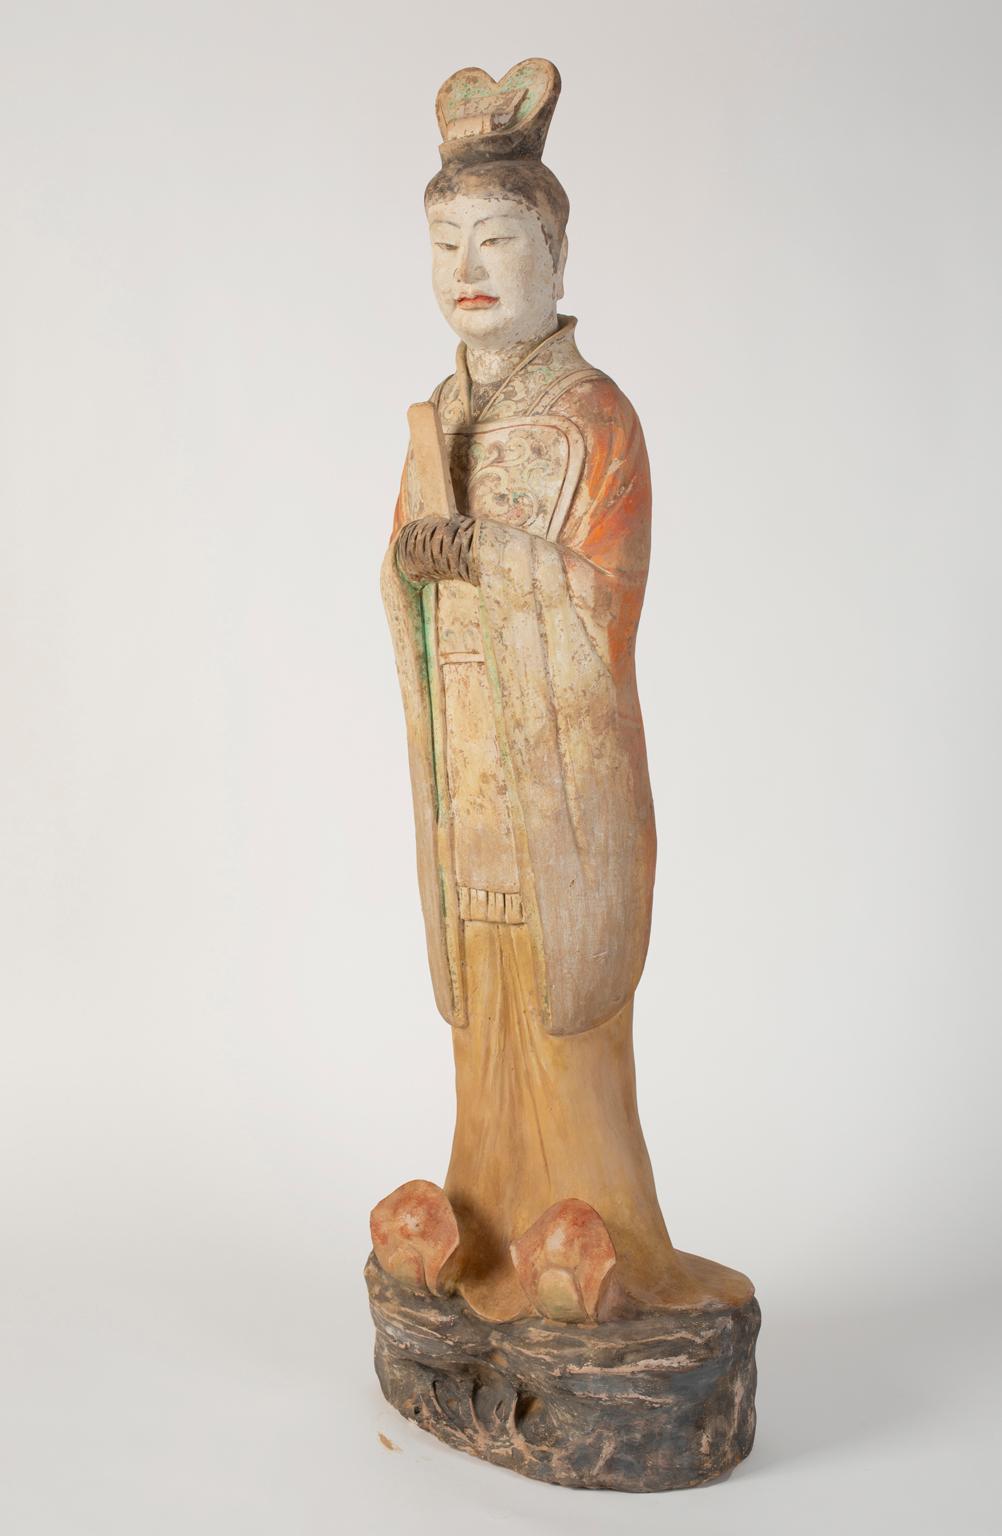 Provenance: a Park Avenue collection

Chinese Tang Dynasty painted pottery figure of a standing official. This tomb burial figure was made as part of a large group of objects to accompany the dead into the afterlife with all they had in life. Only